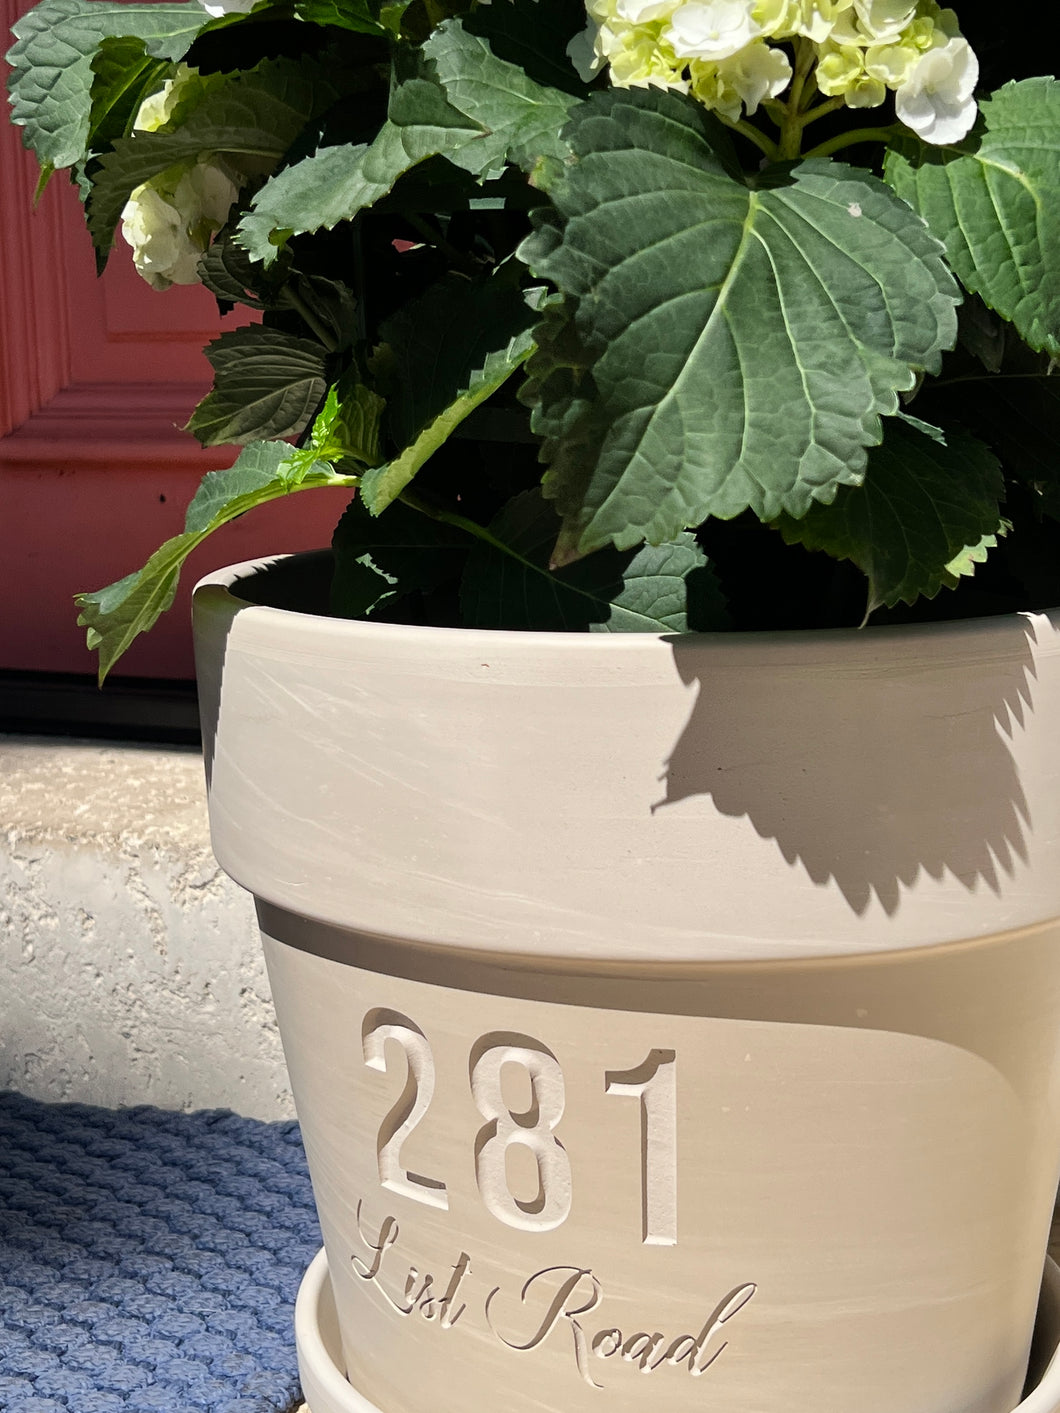 Large Deep Etched Clay Flower Pot with Home Street Address